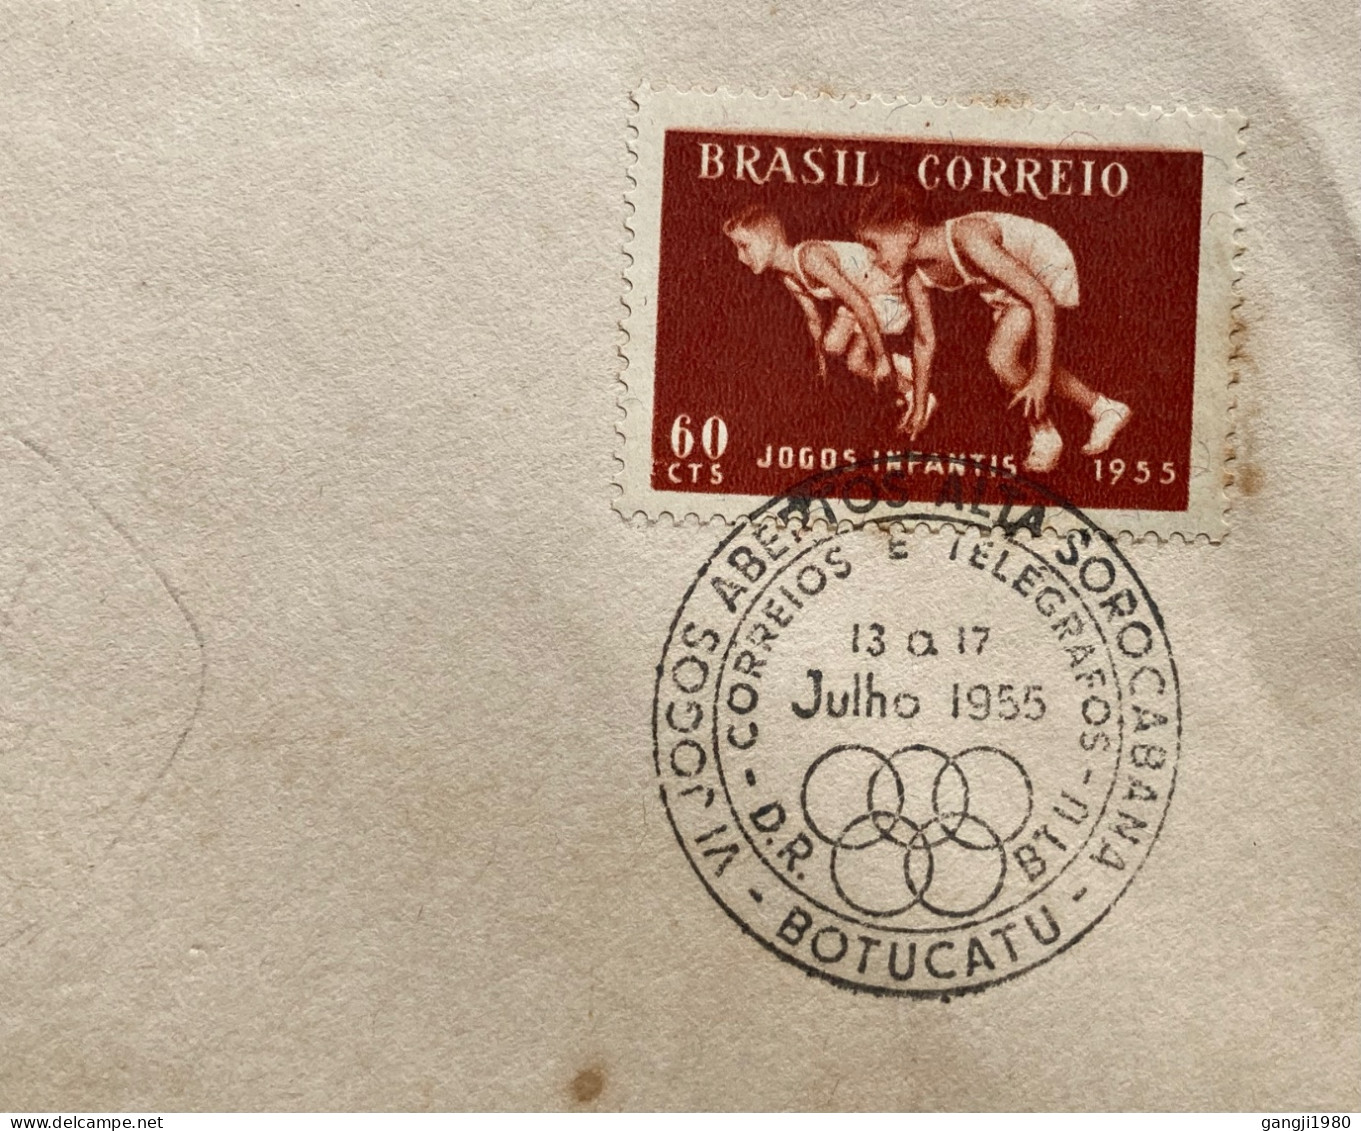 BRAZIL1955, FDC COVER OLYMPIC & TORCH, CHILDREN GAME, SPORT, ILLUSTRATE SPECIAL PICTURE, BOTUCATU CITY CANCEL, VI JAGOS - Lettres & Documents